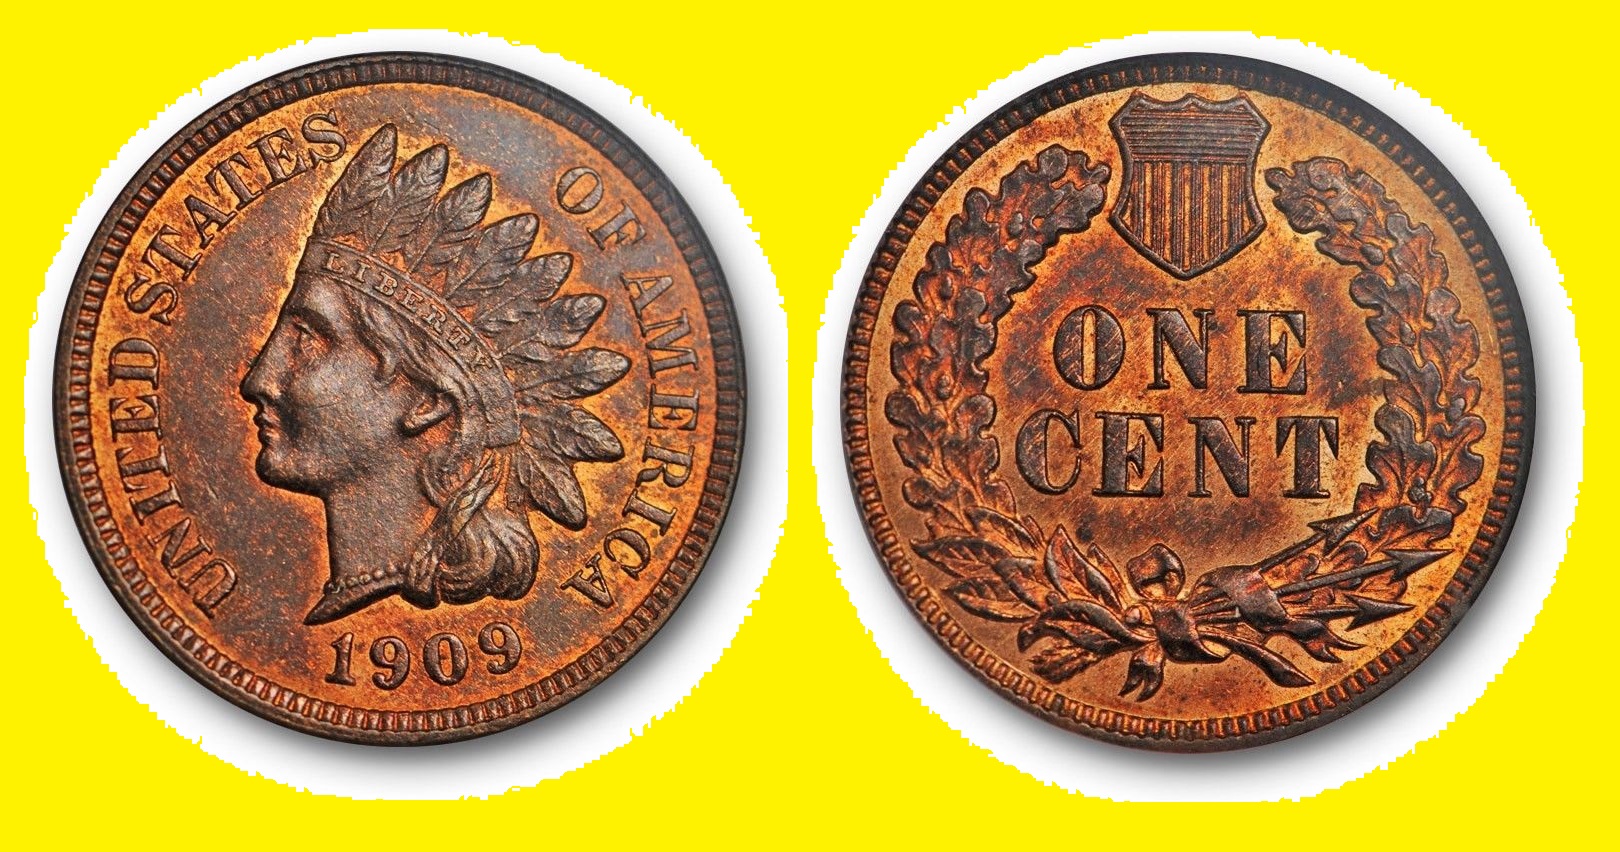 1909 Indian Head Cent NGC Ms 65  Red Brown Original US $195.00.jpg